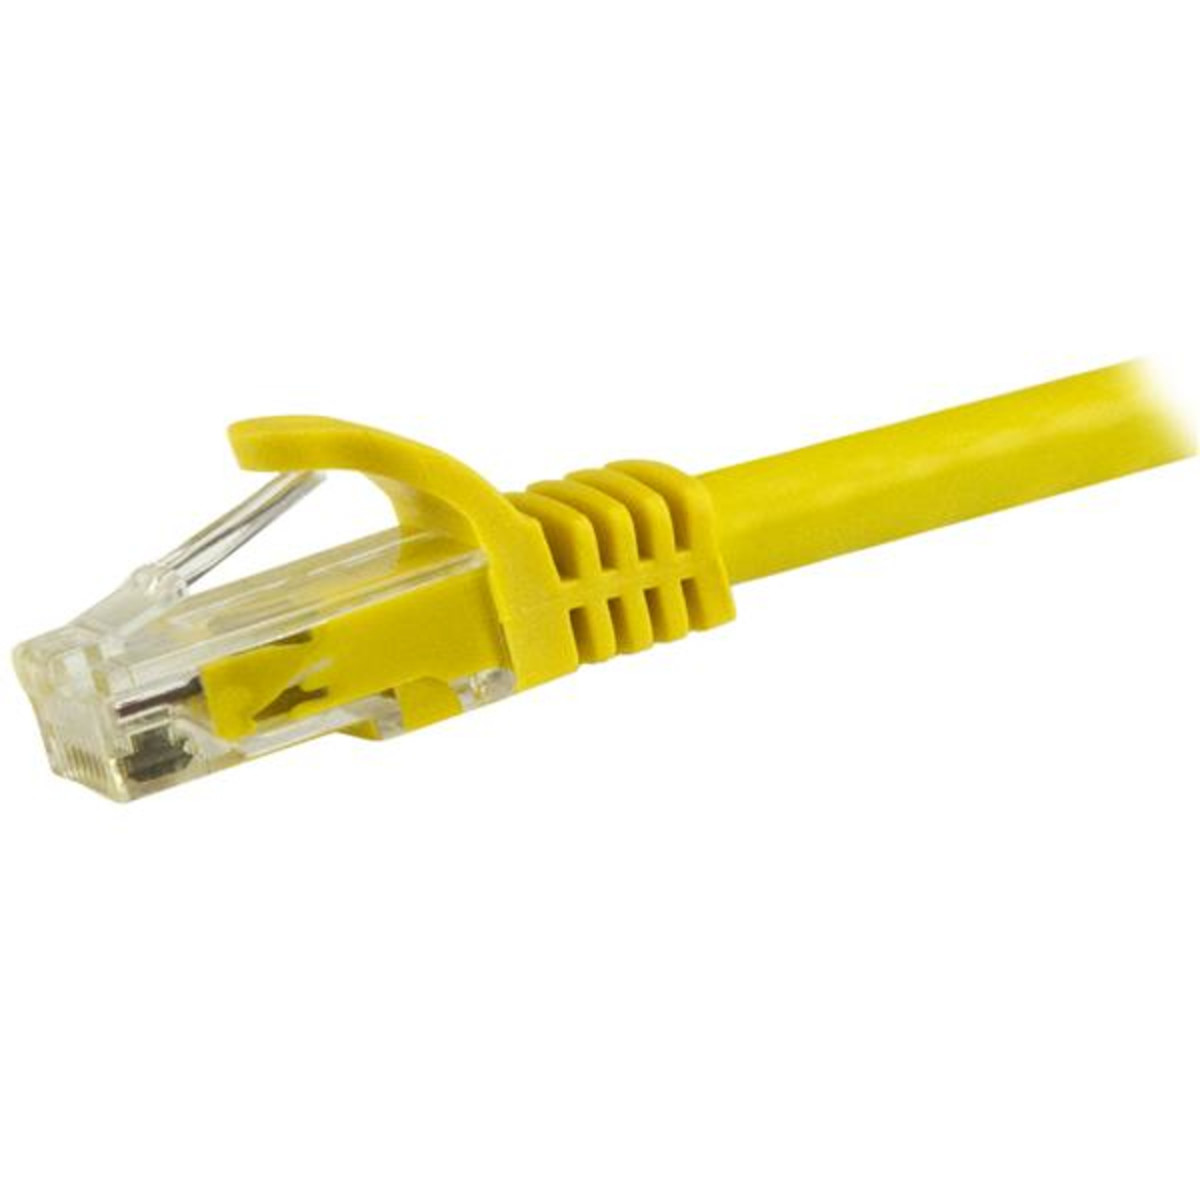 Cable -Yellow CAT6 Patch Cord 1.5 m